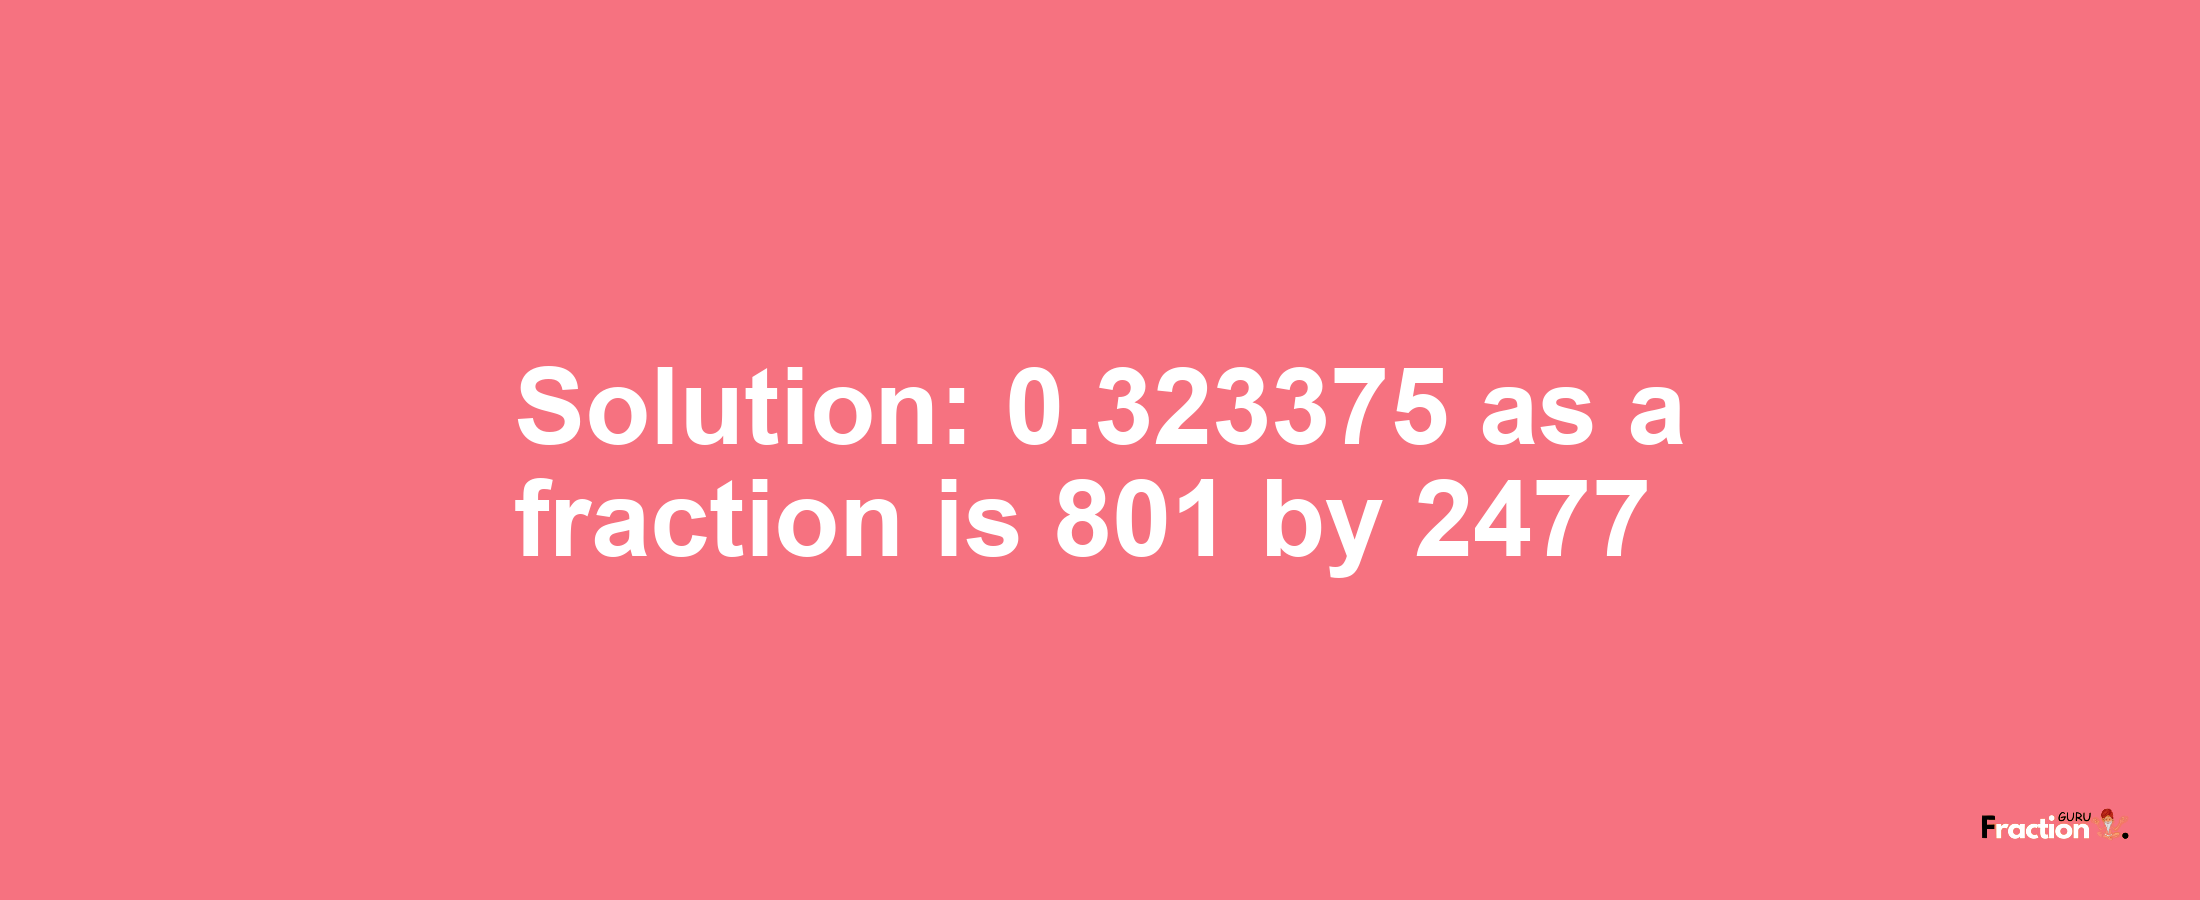 Solution:0.323375 as a fraction is 801/2477